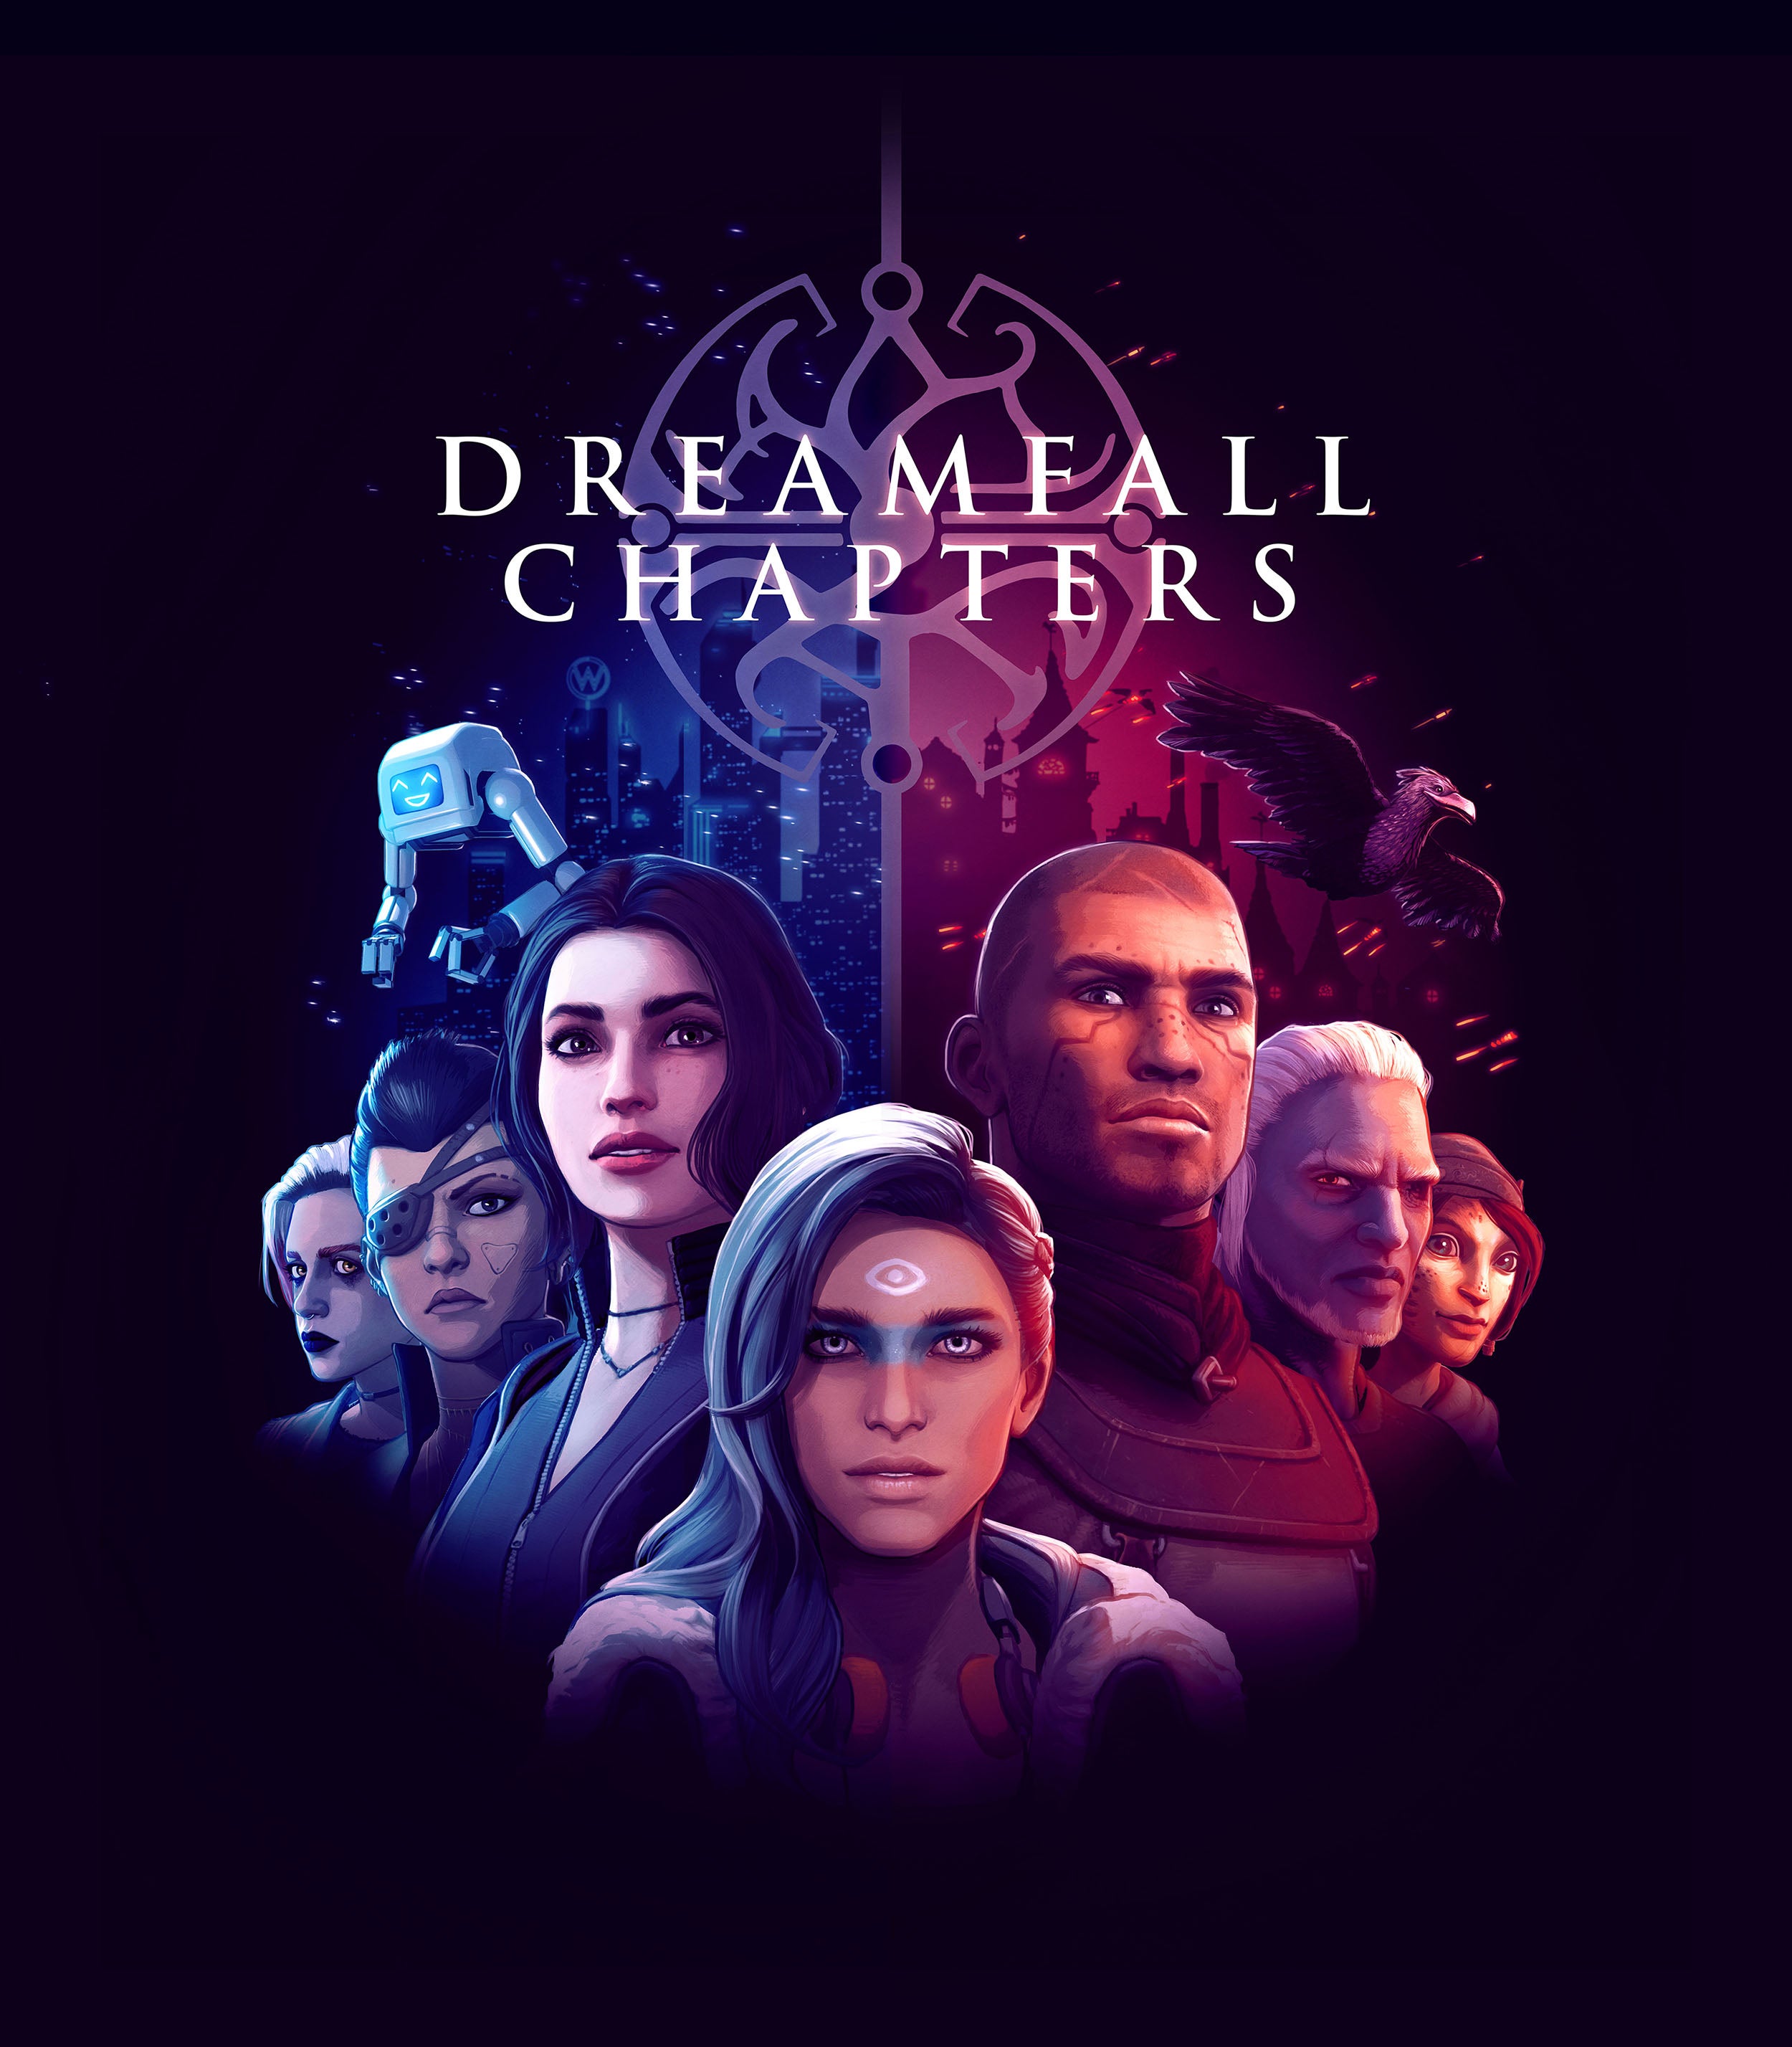 Image for Dreamfall Chapters heads to PS4 and Xbox One in Spring 2017